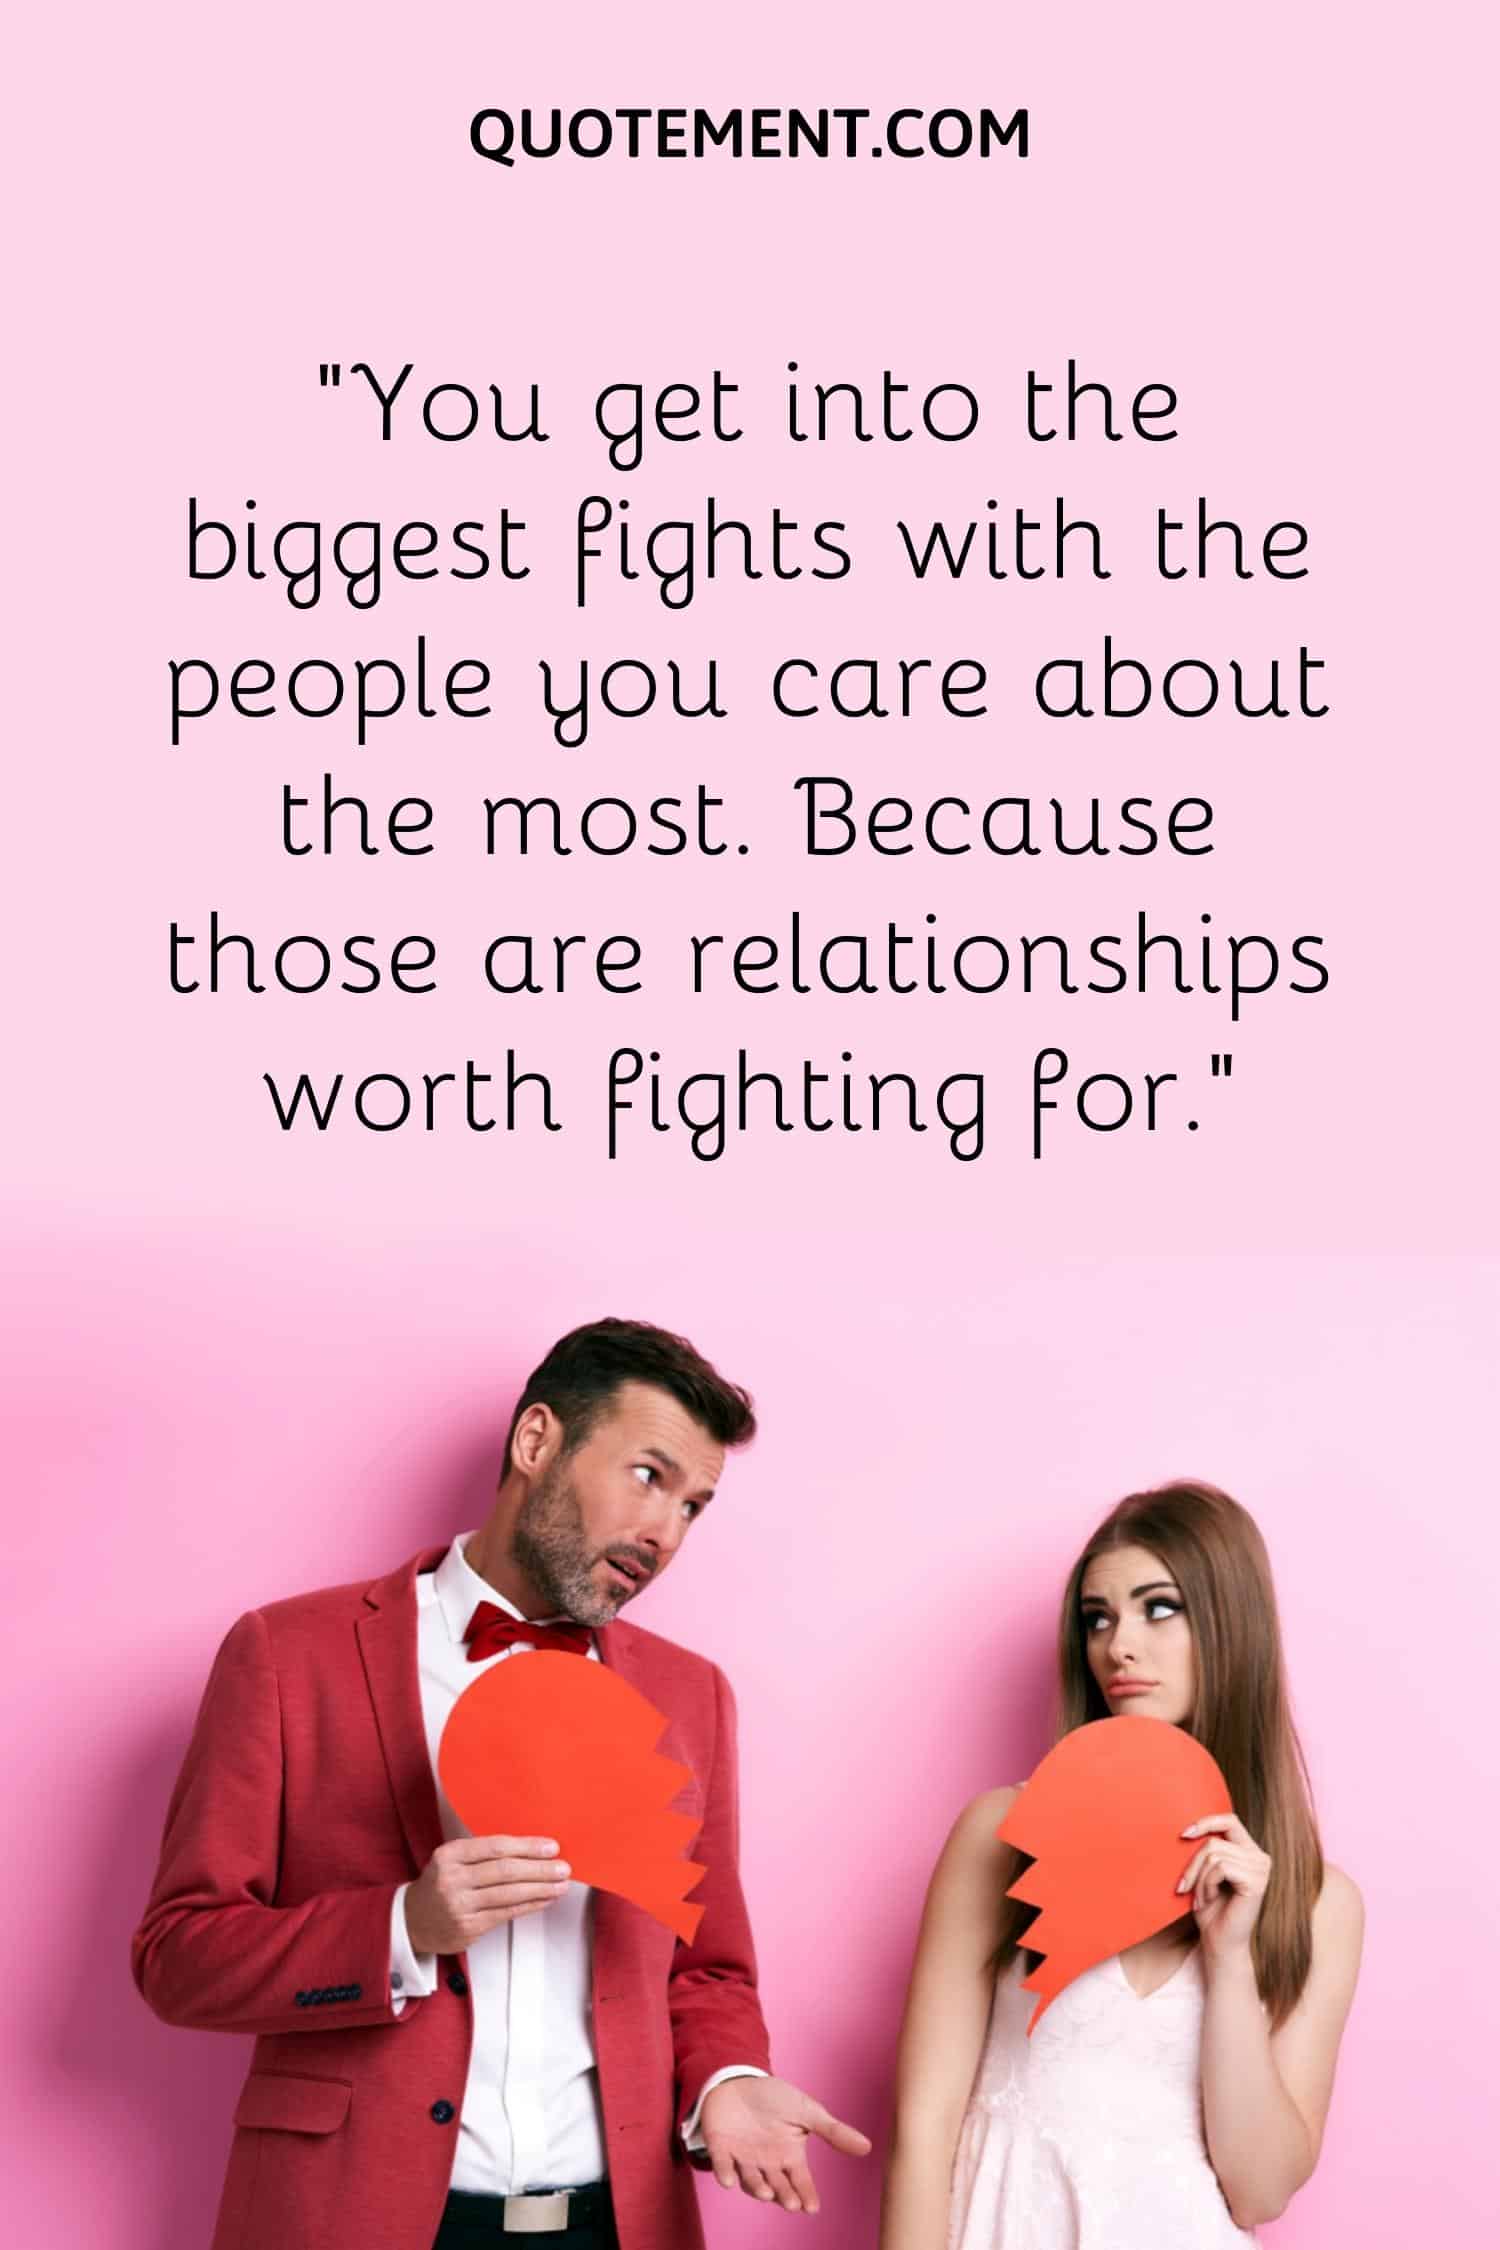 “You get into the biggest fights with the people you care about the most. Because those are relationships worth fighting for.”